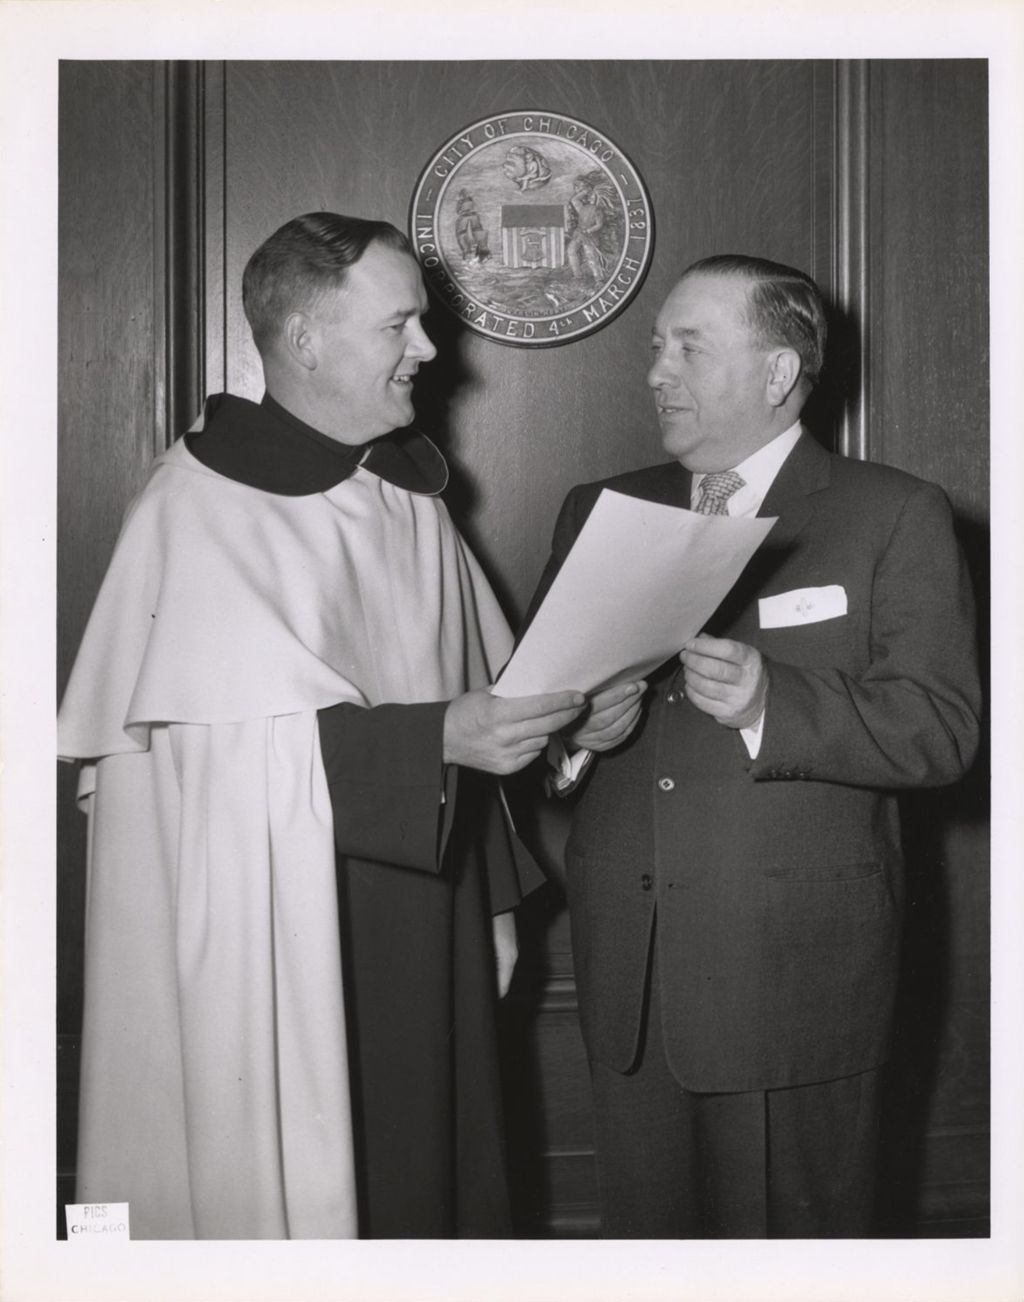 Miniature of Richard J. Daley and a clergyman